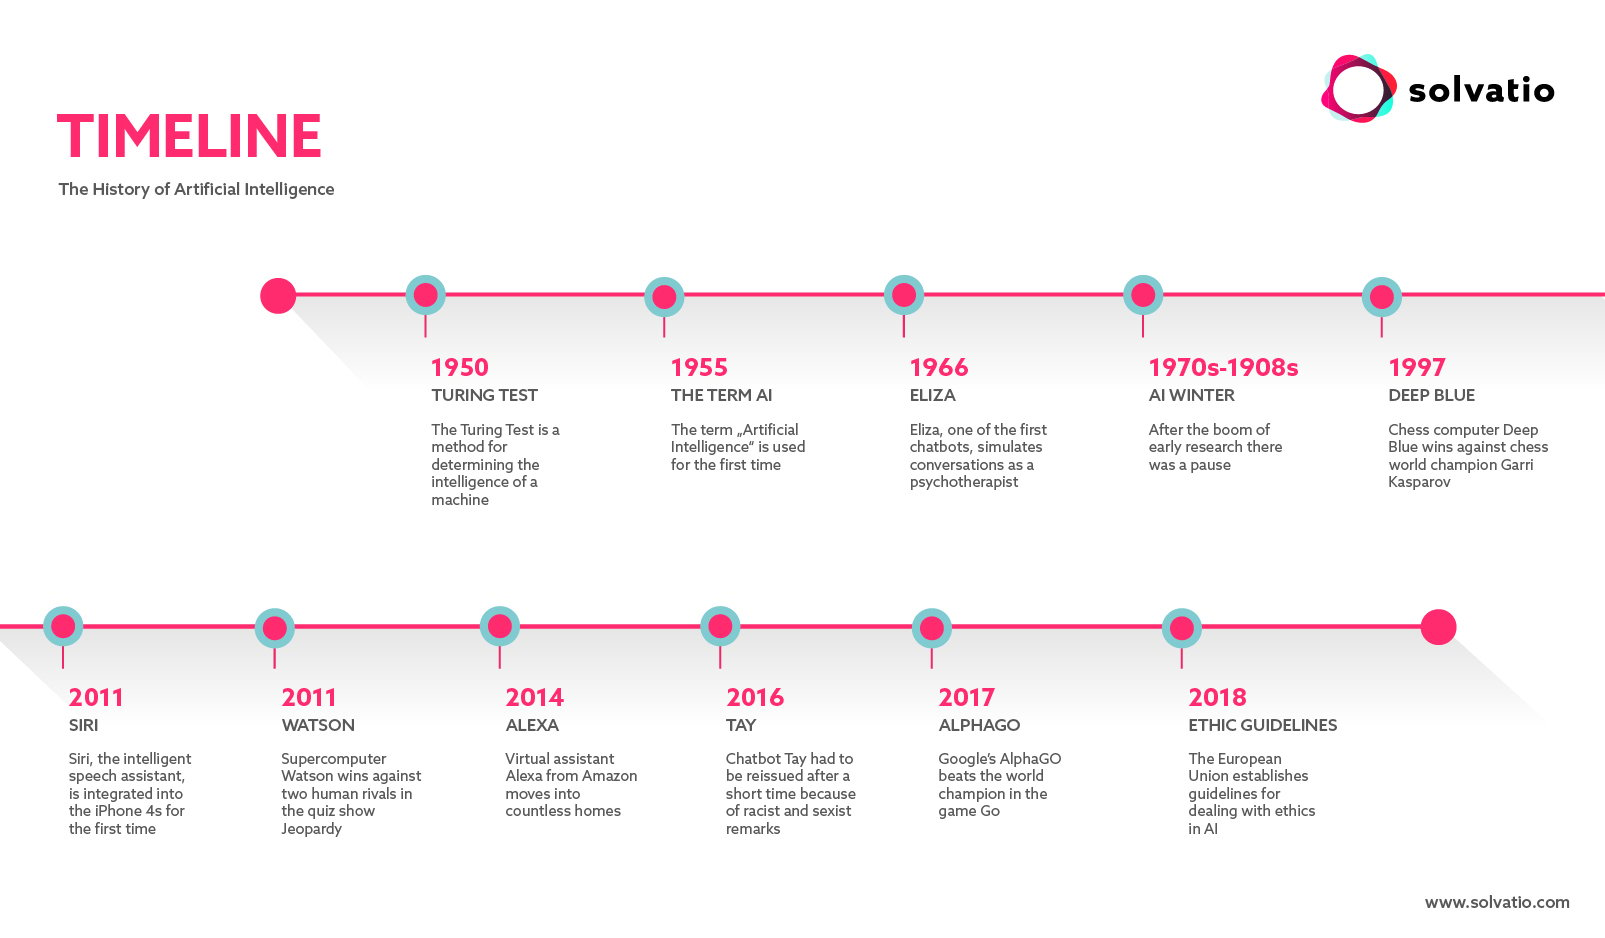 Timeline - The history of artificial intelligence